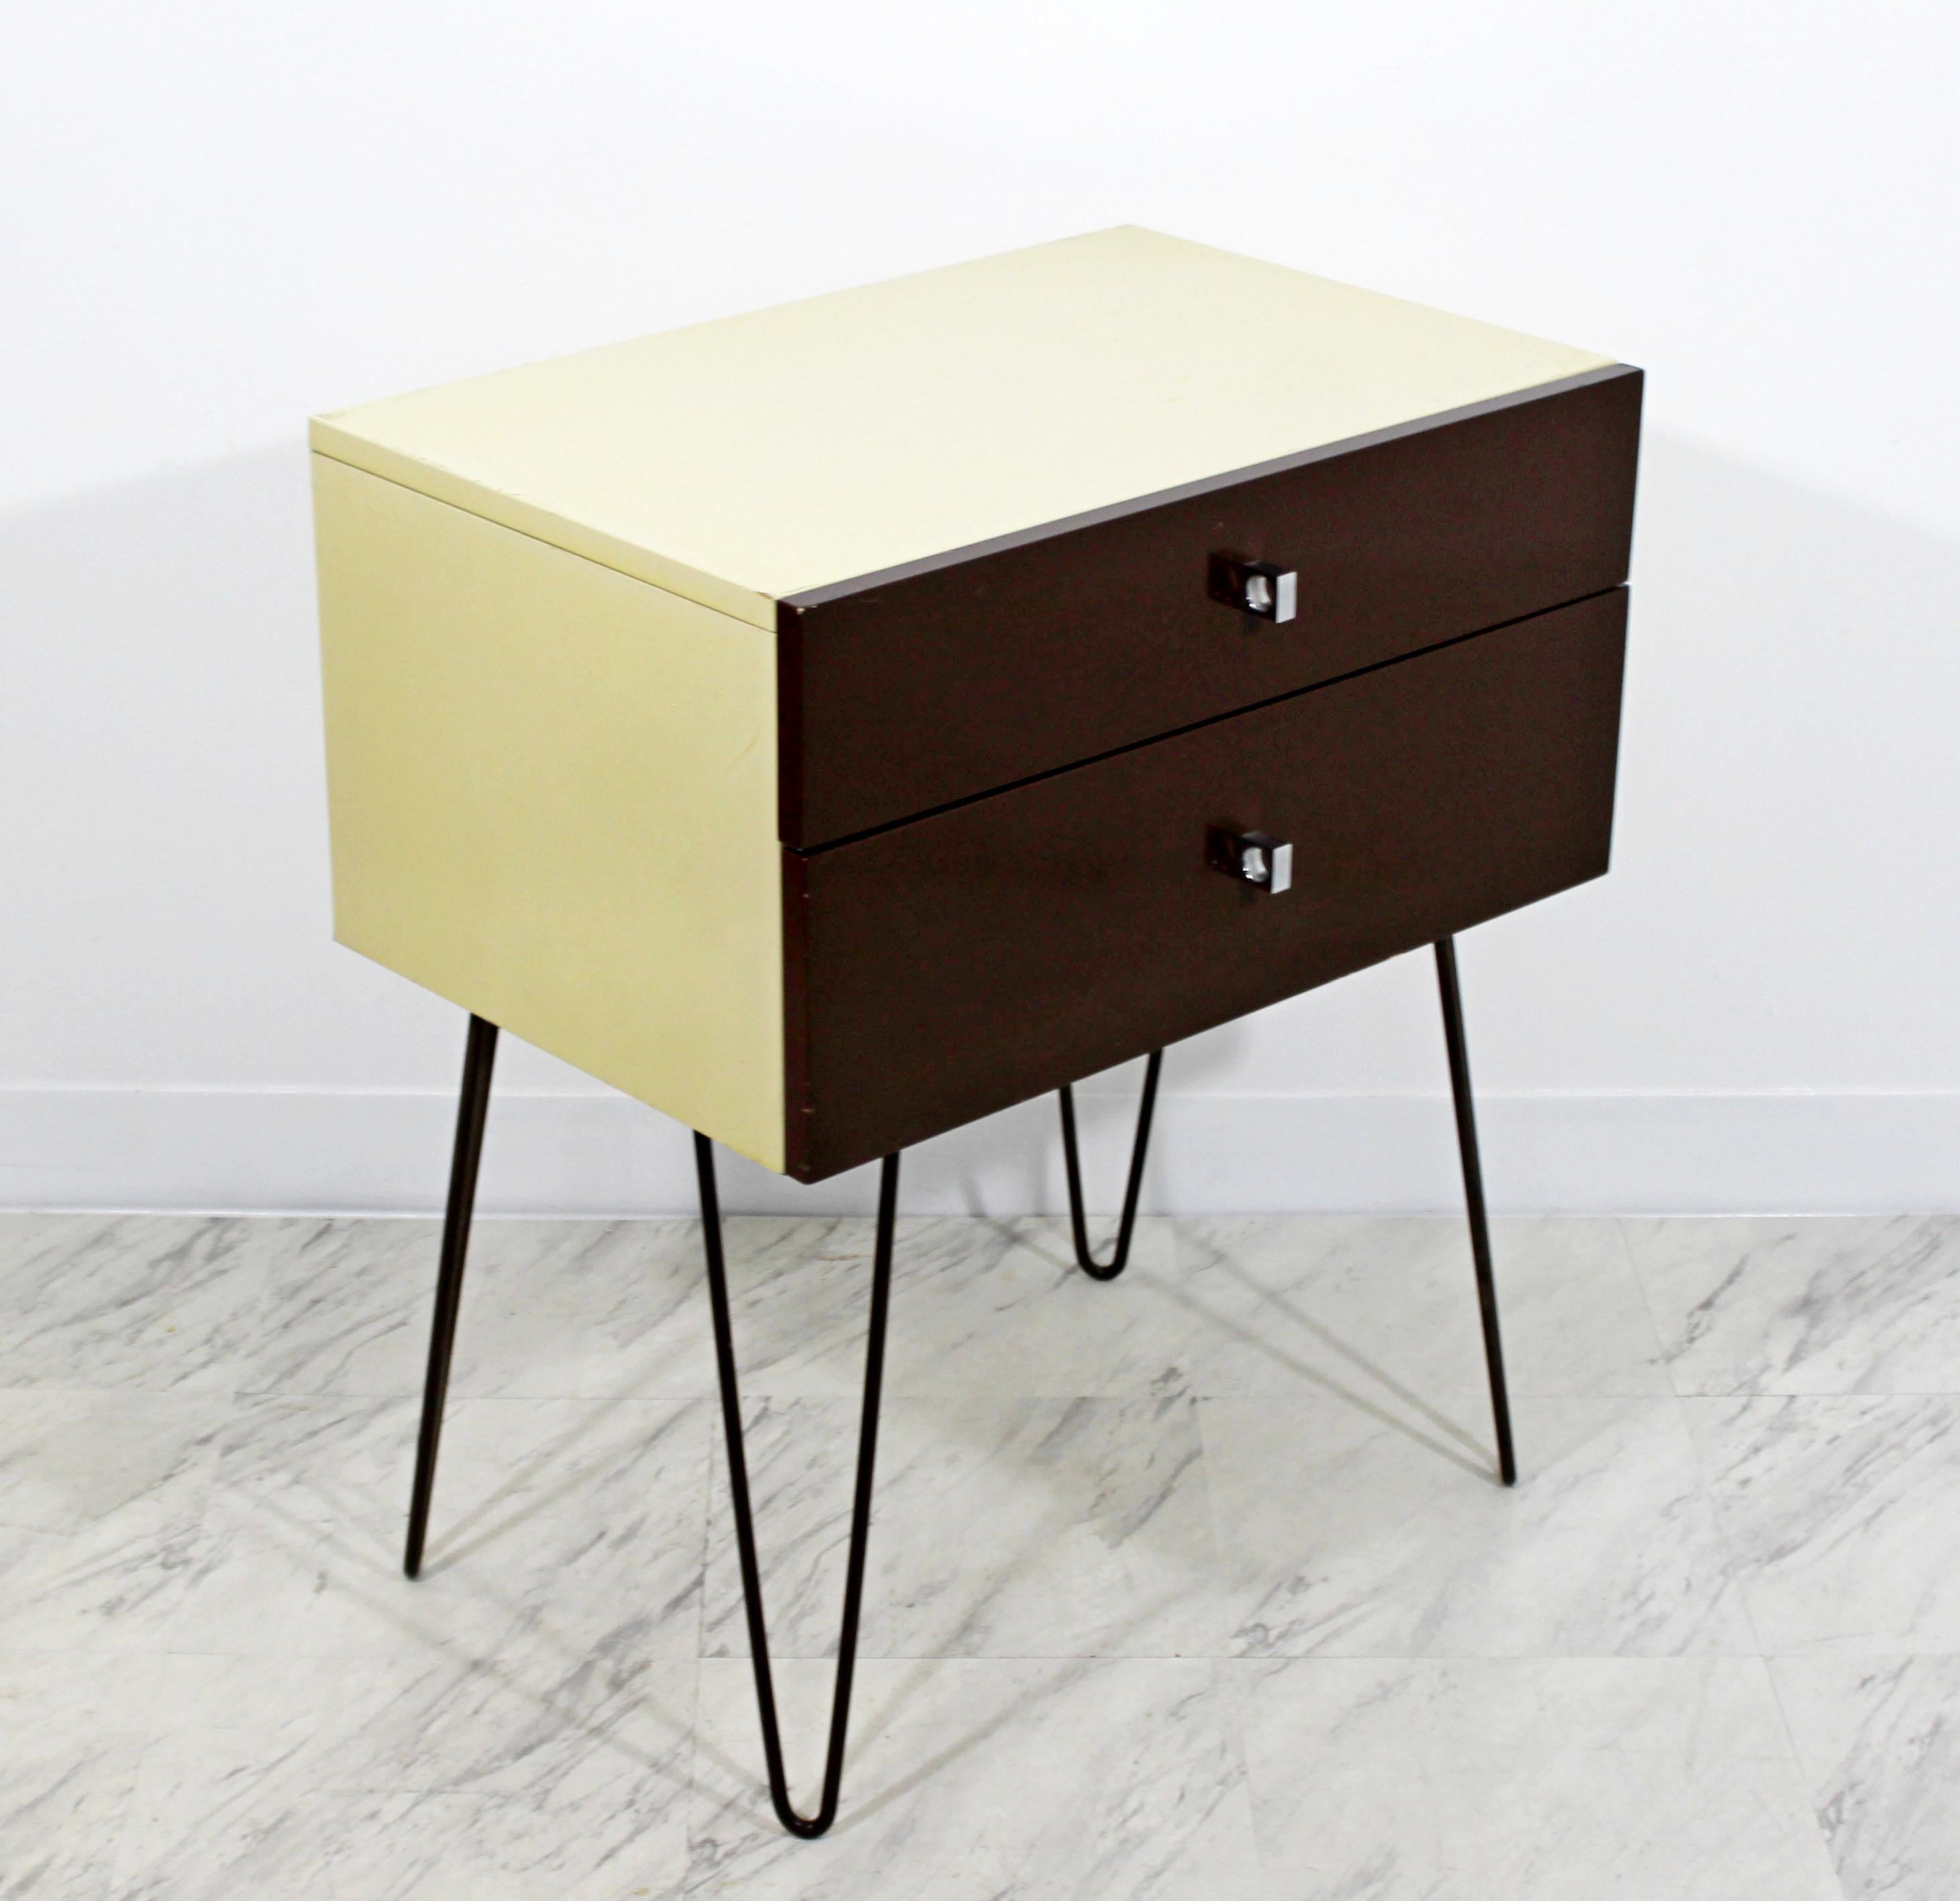 For your consideration is an original side or end table, with two drawers that have chrome pulls, on hairpin legs, by Rougier, circa the 1960s. In good condition. The dimensions are 24